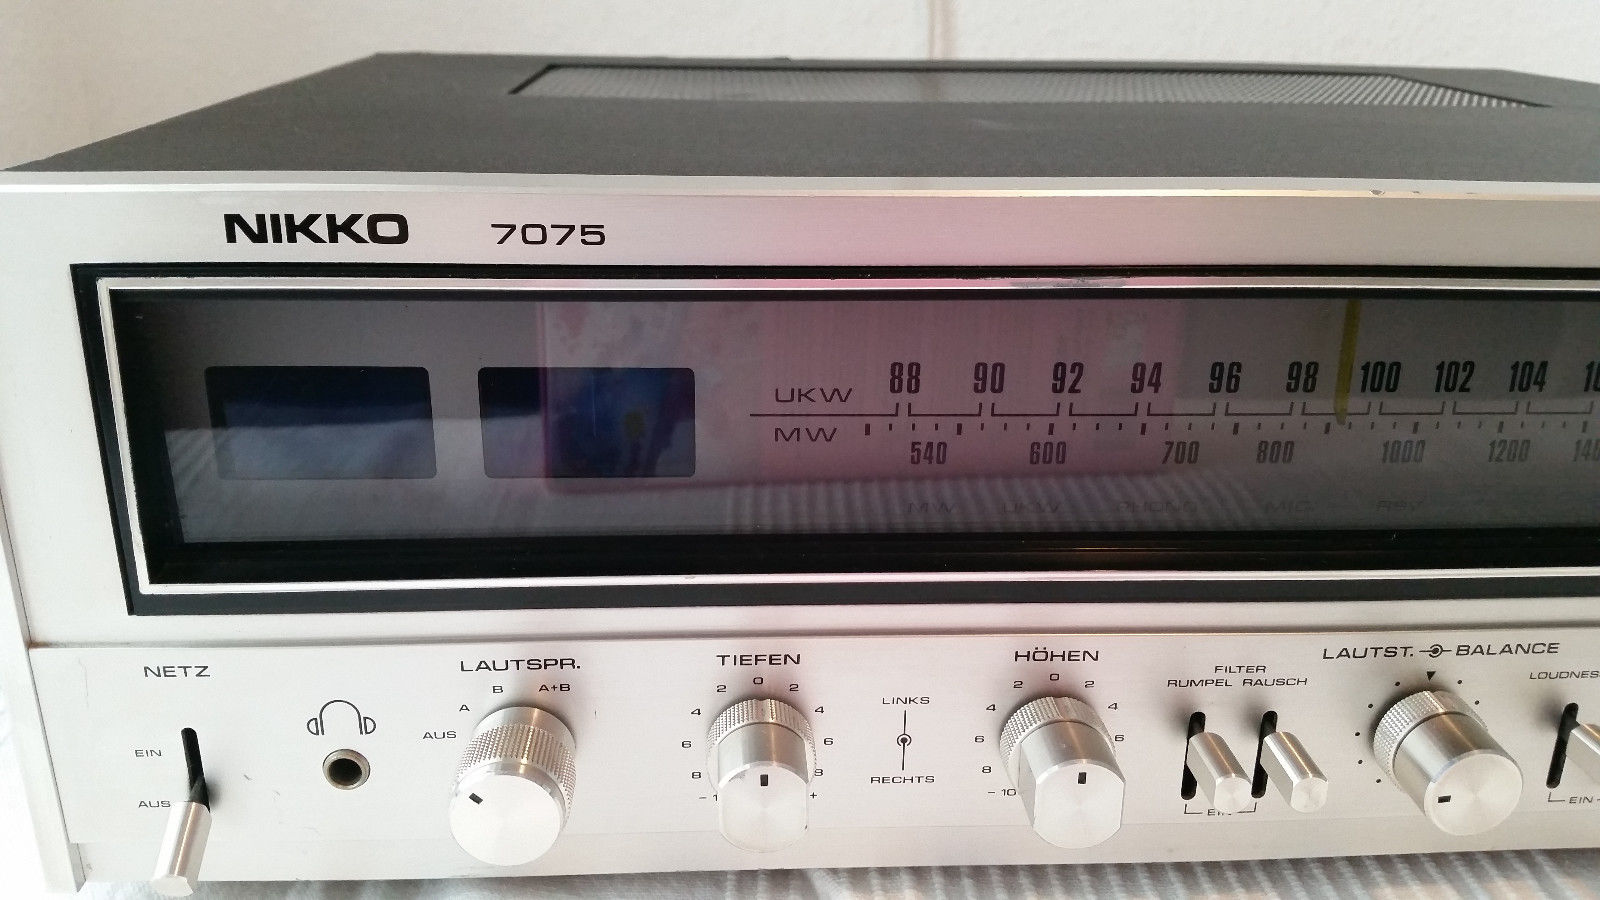 Nikko-STA-7075-strong-vintage-stereo-receiver-silver-wood-_57.2.jpg